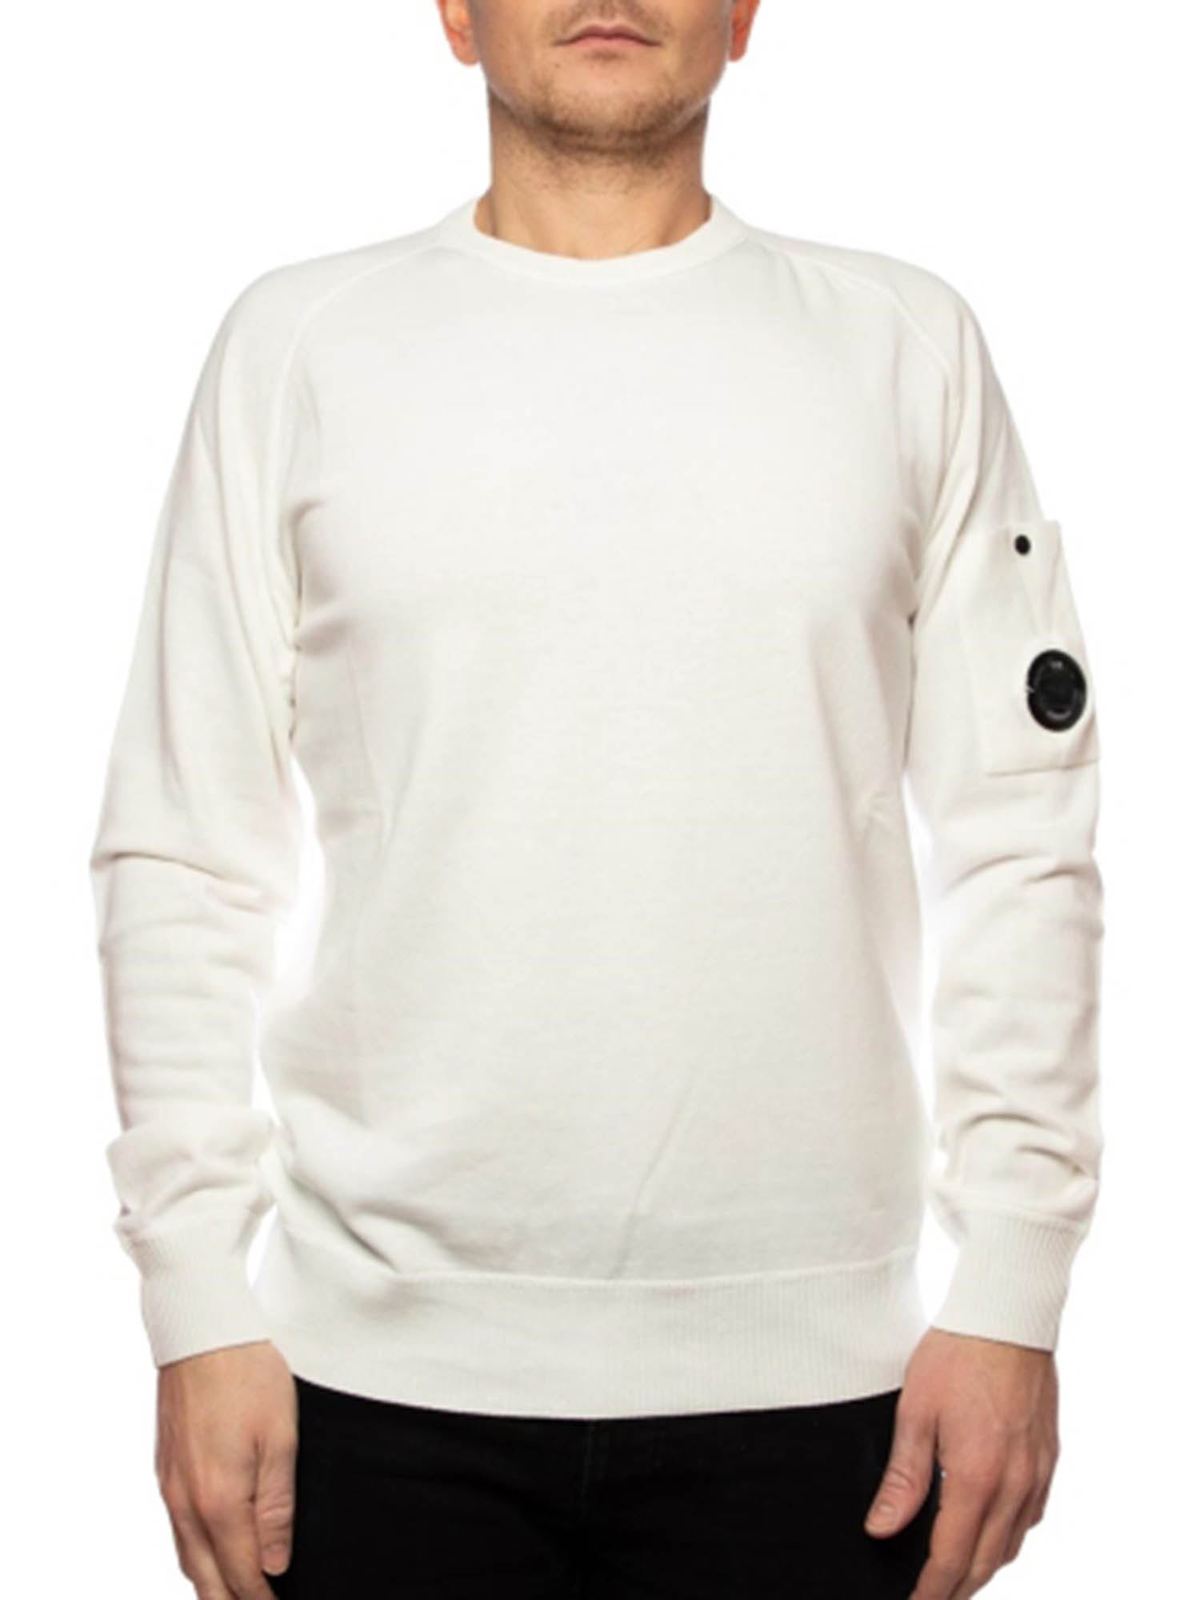 C.P. COMPANY CREPE GARMENT DYED SWEATER IN WHITE